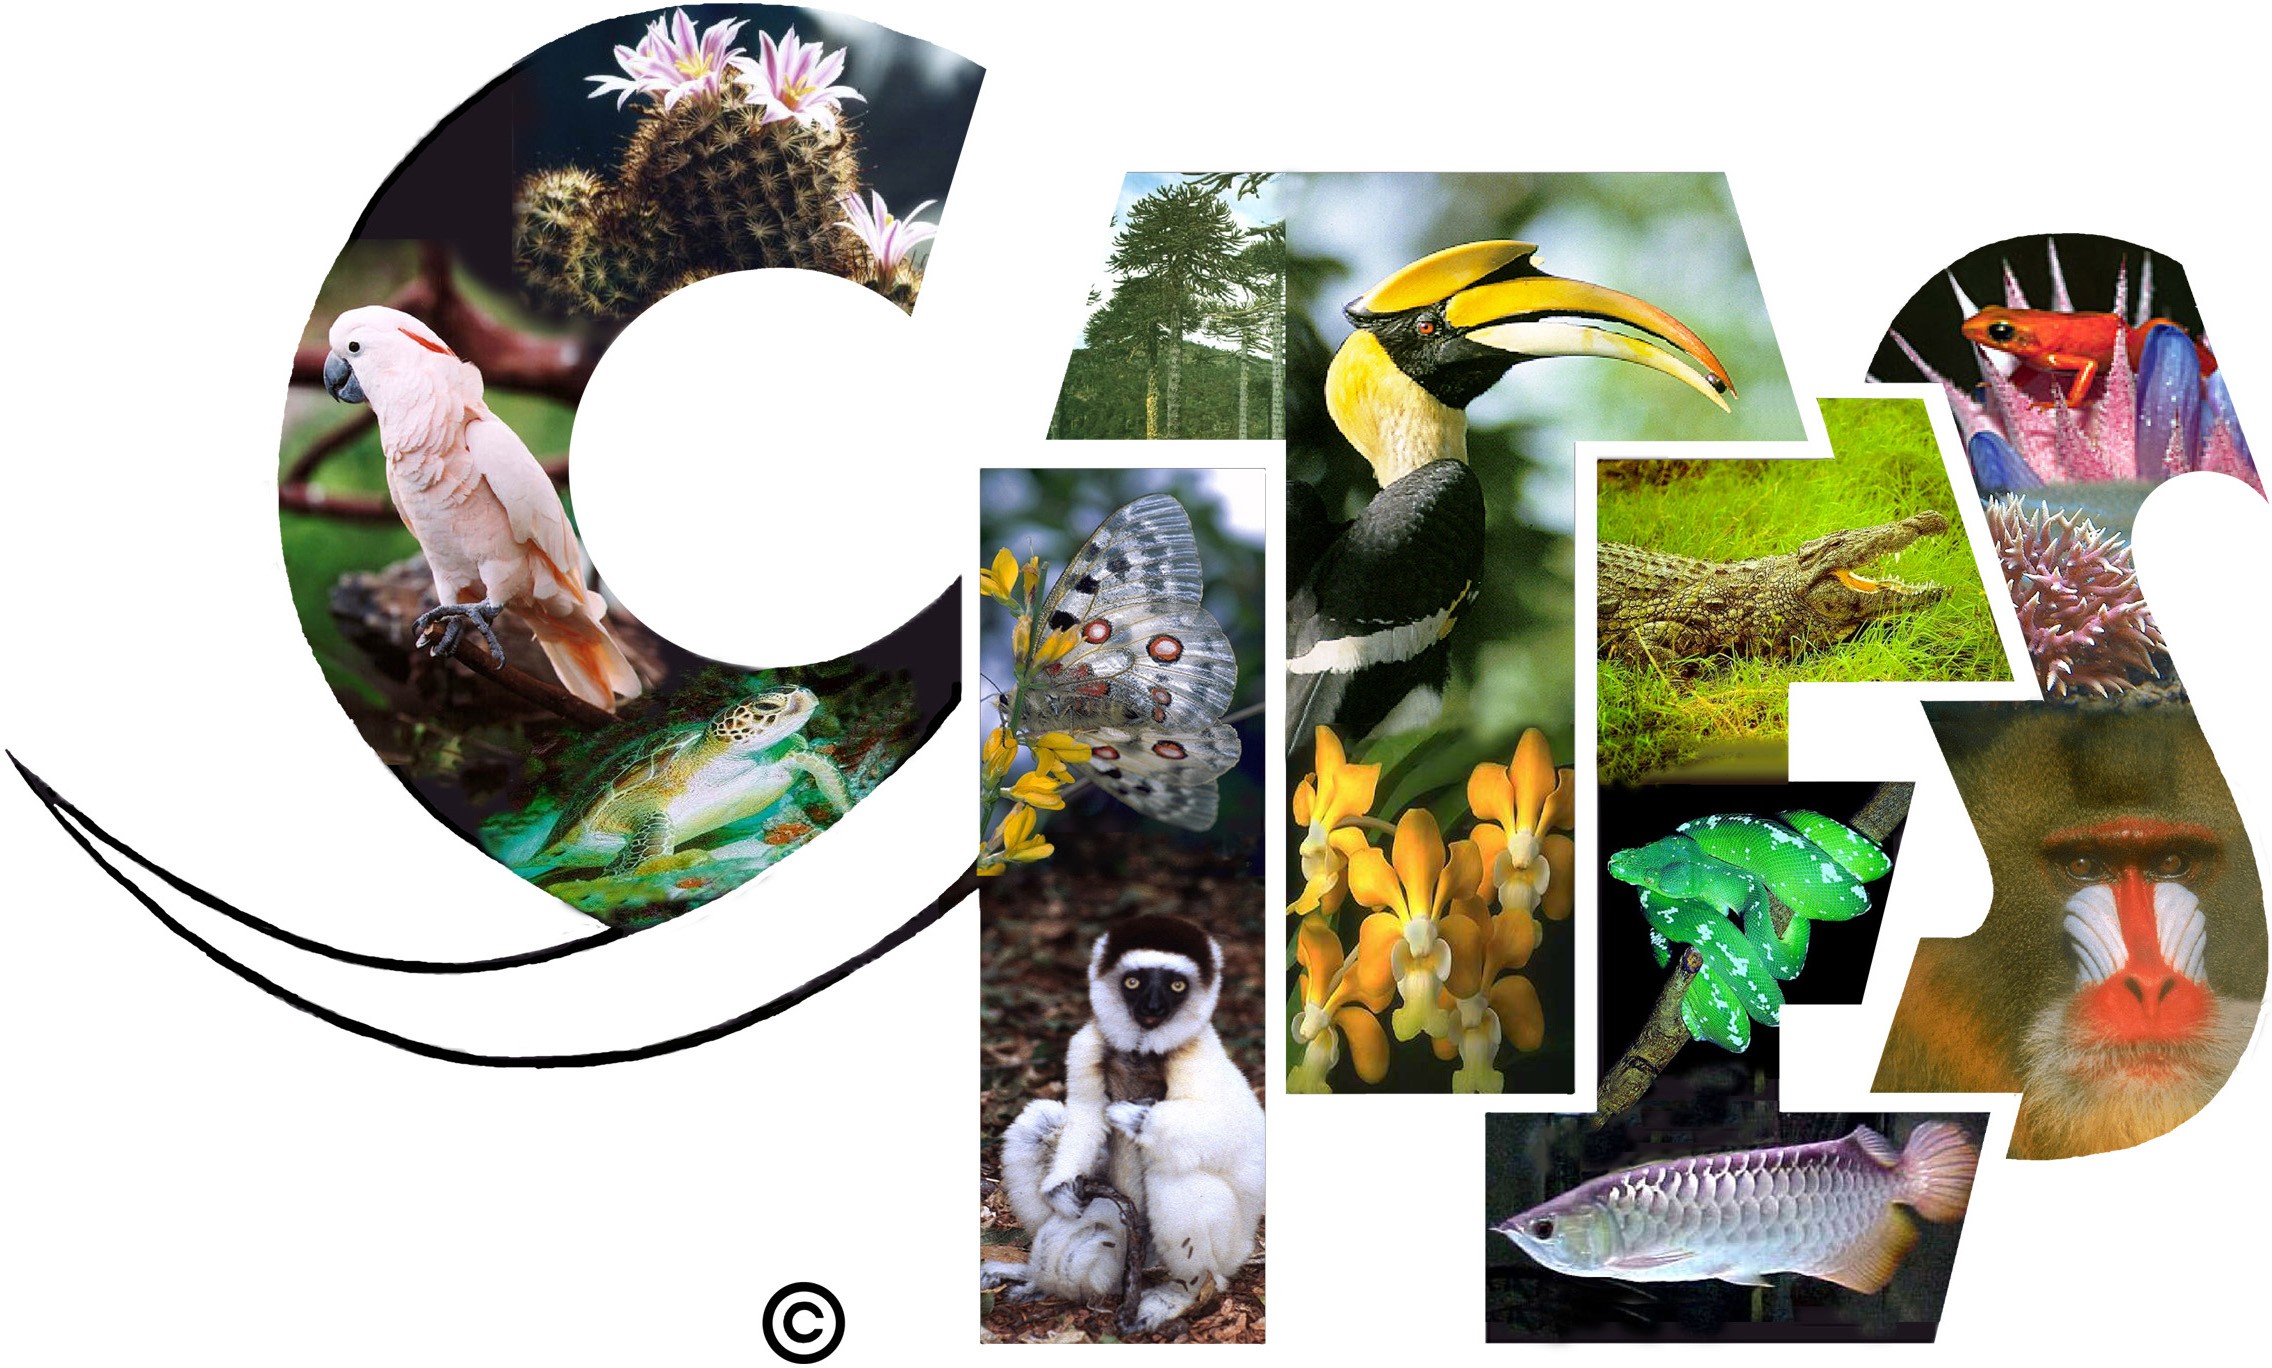 Sri Lanka announces dates to host 18th Meeting of Conference of Parties to the CITES in 2019